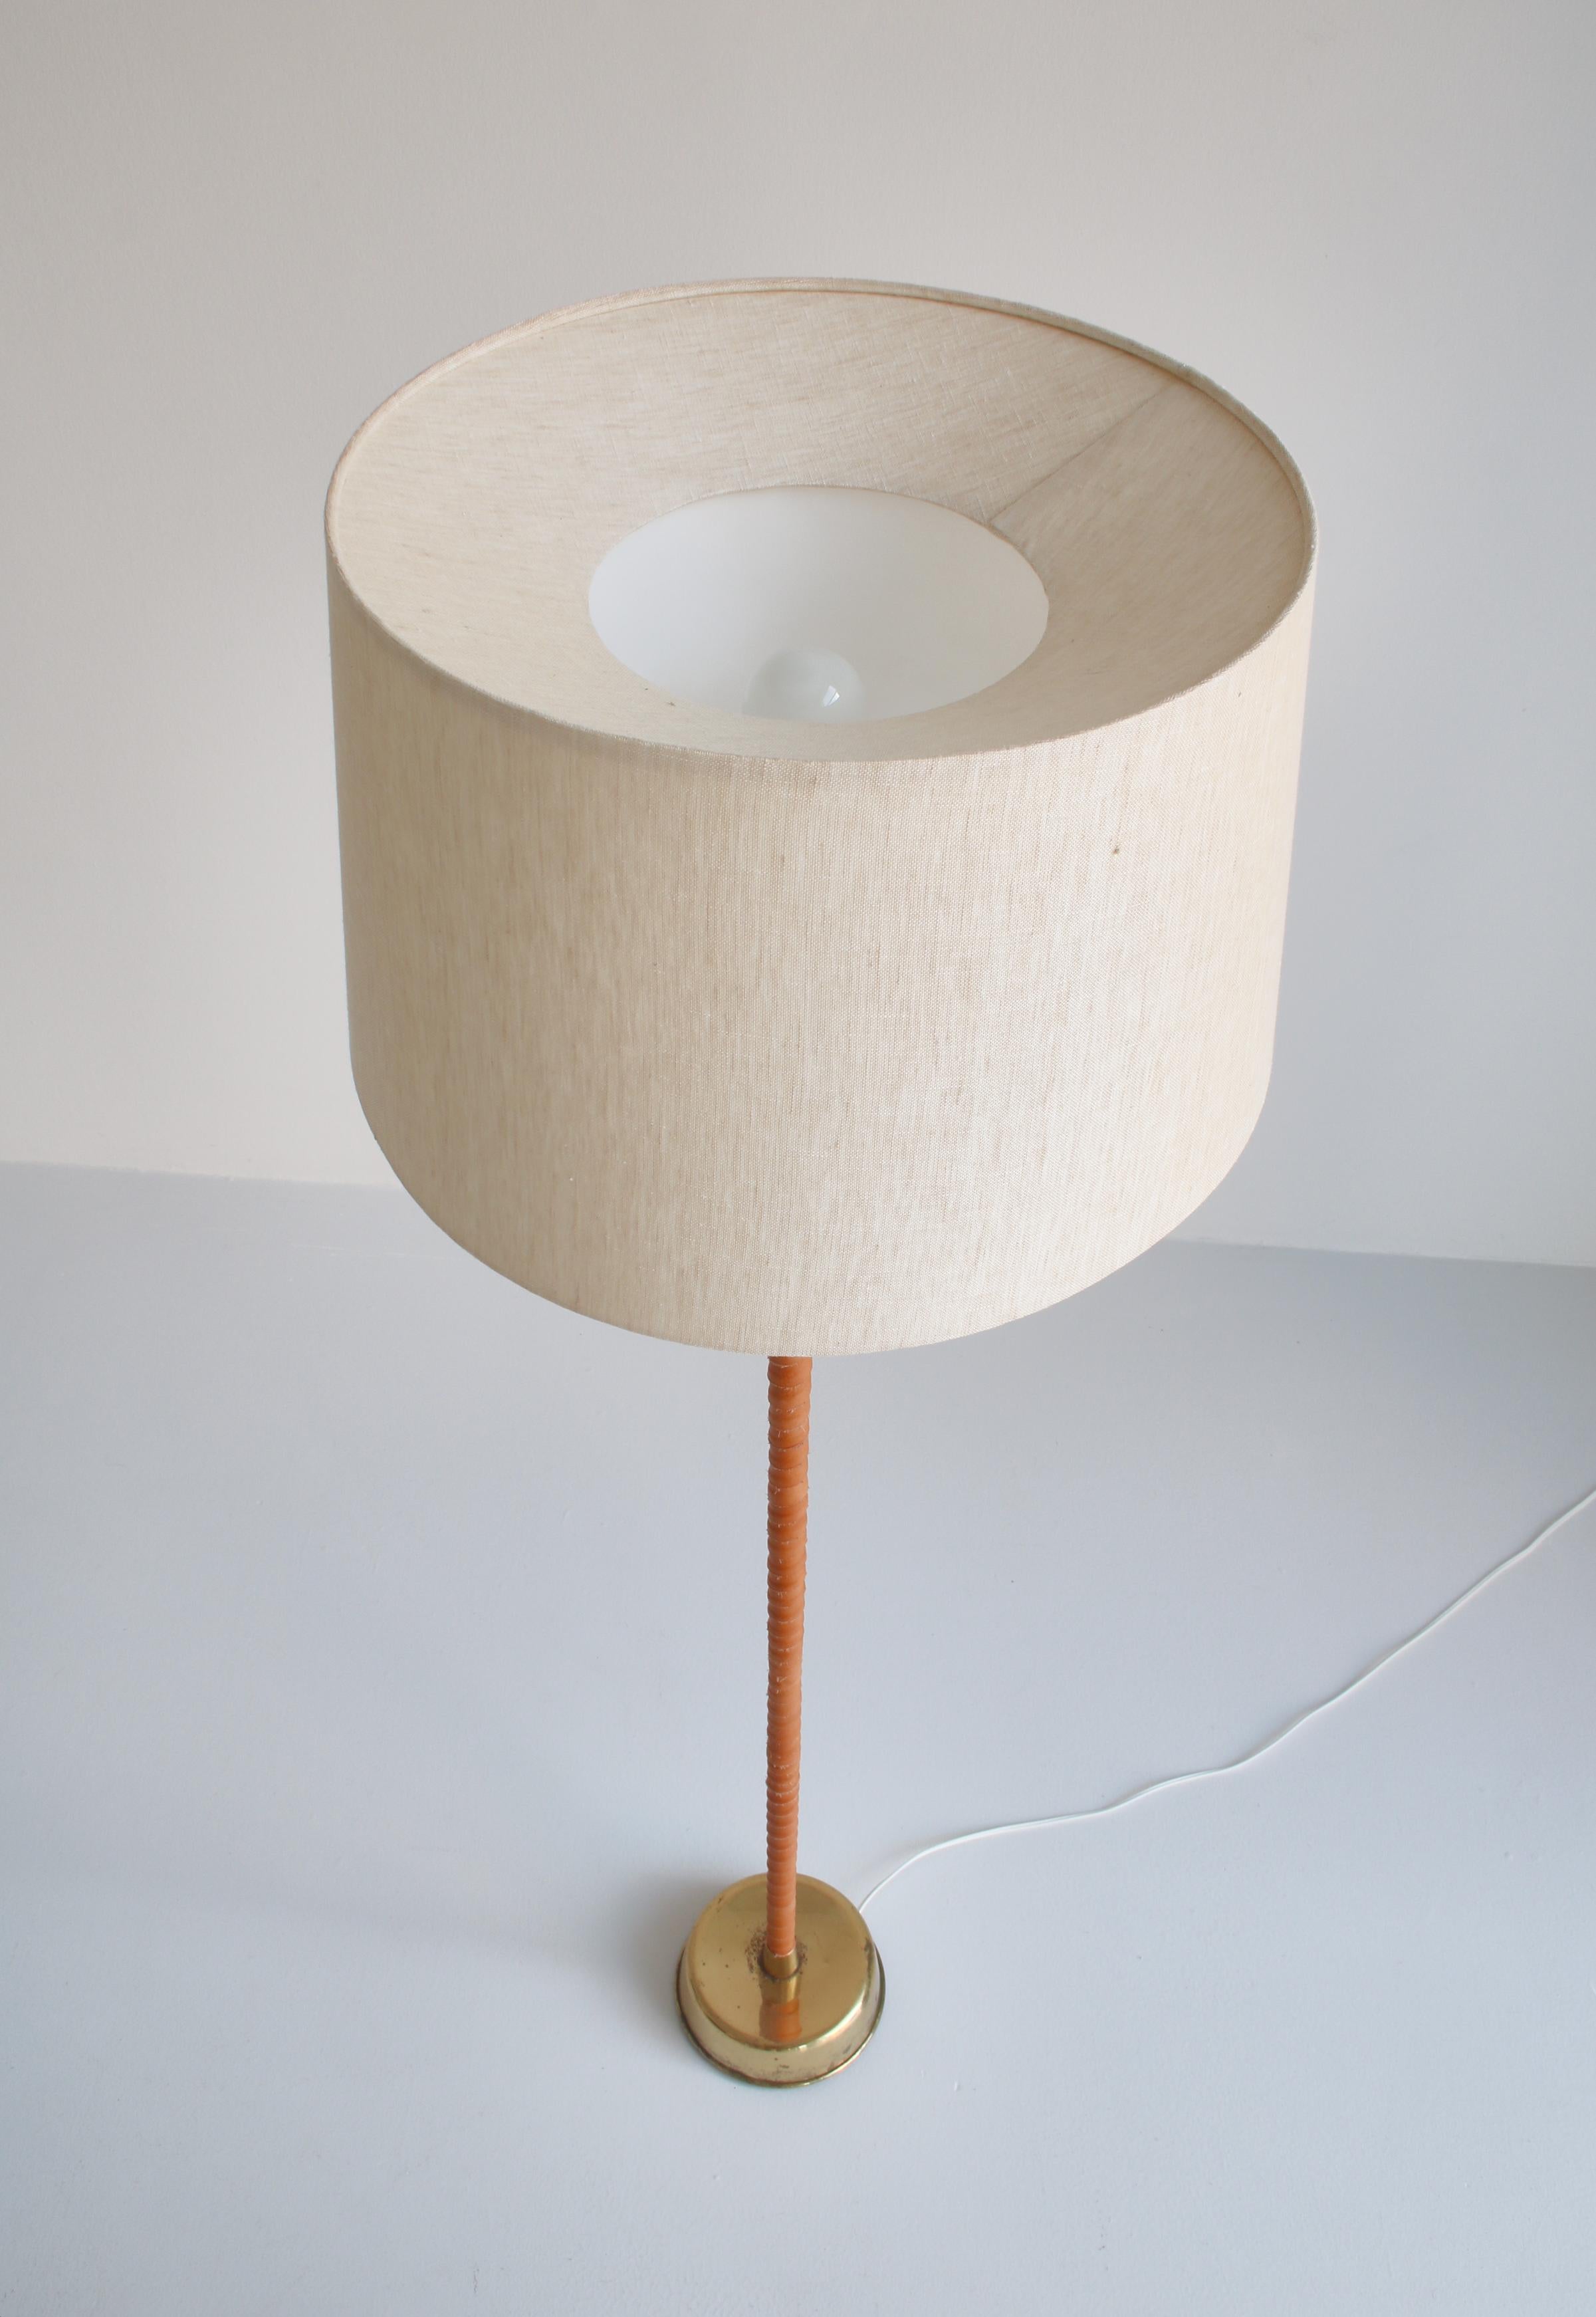 Mid-20th Century 1950s Floor Lamp by Lisa Johansson-Pape in Brass and Leather for ORNO, Finland